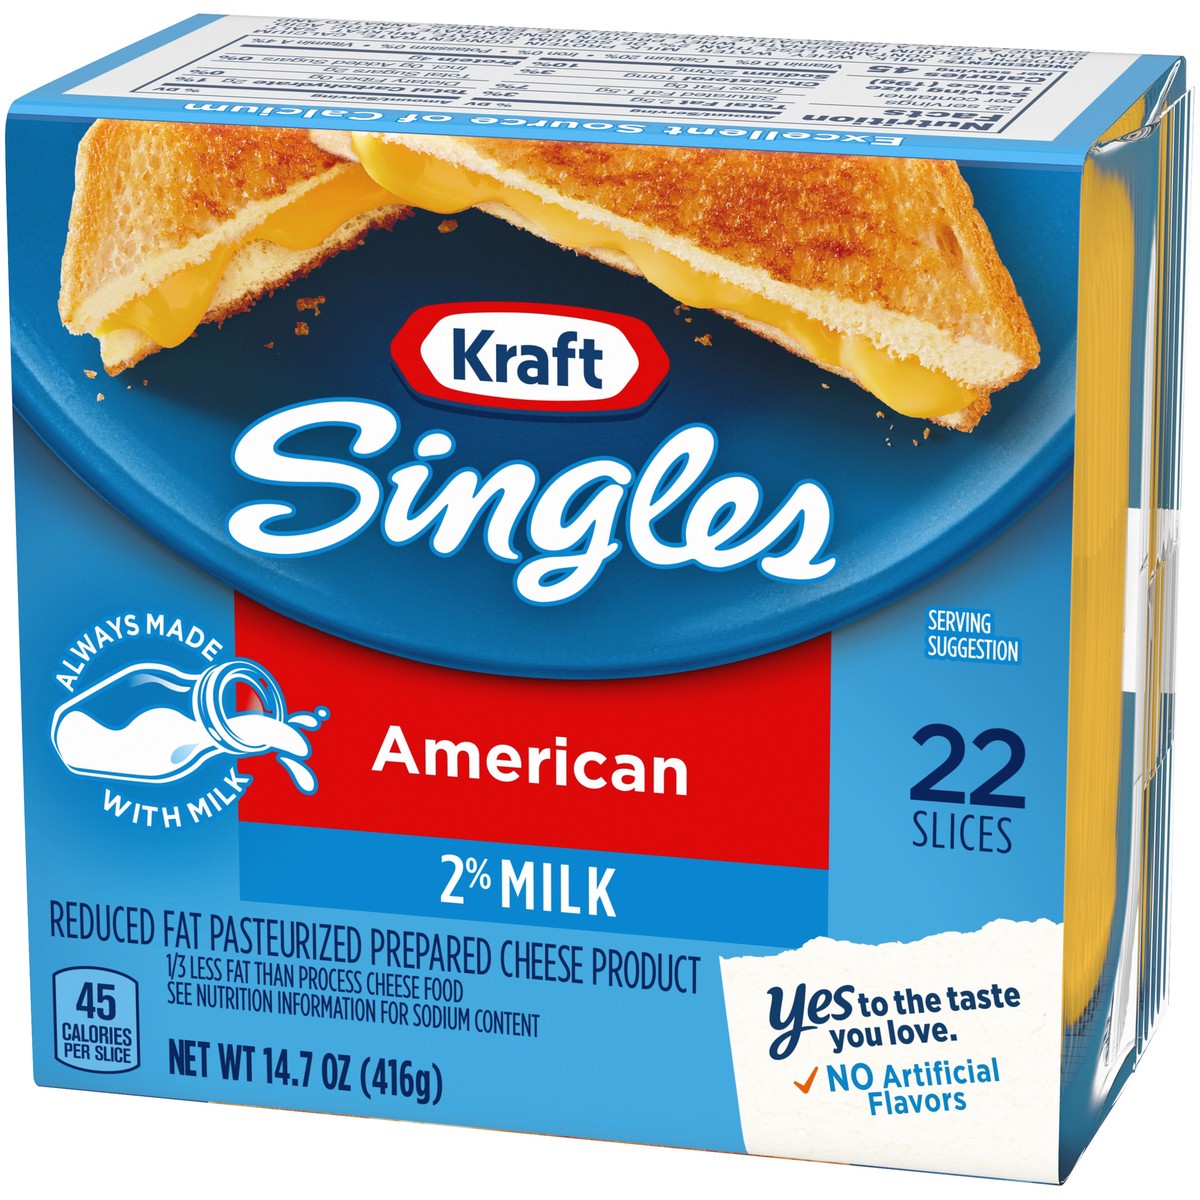 slide 8 of 9, Kraft Singles 2% Pasteurized Prepared Cheese Product American Slices, 22 ct Pack, 22 ct